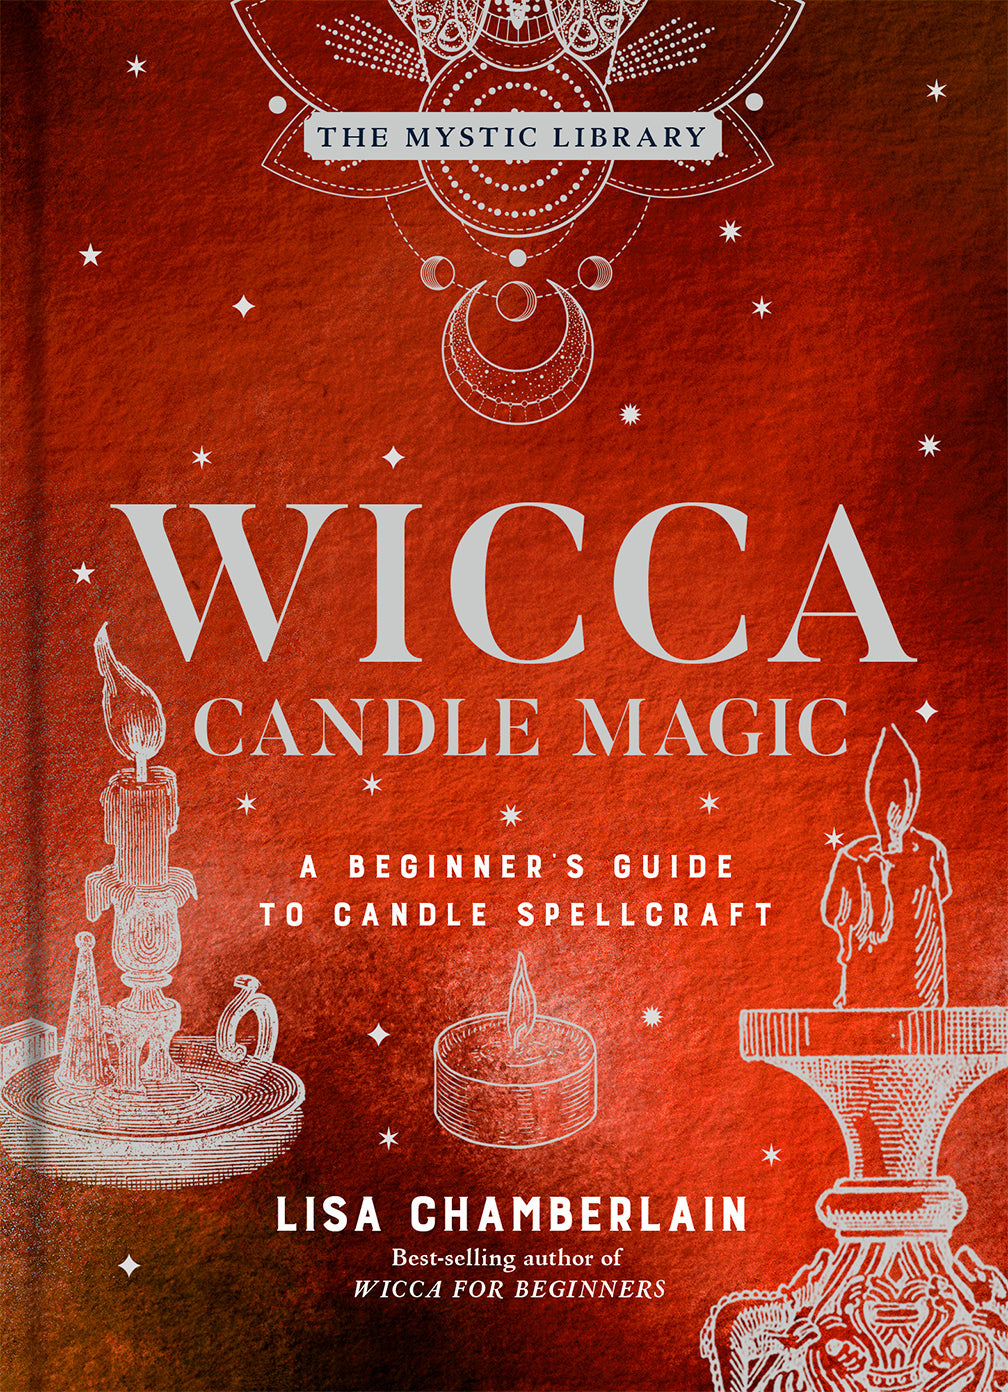 Wicca Candle Magic: A Beginner's Guide to Candle Spellcraft (Volume 3) (The Mystic Library)